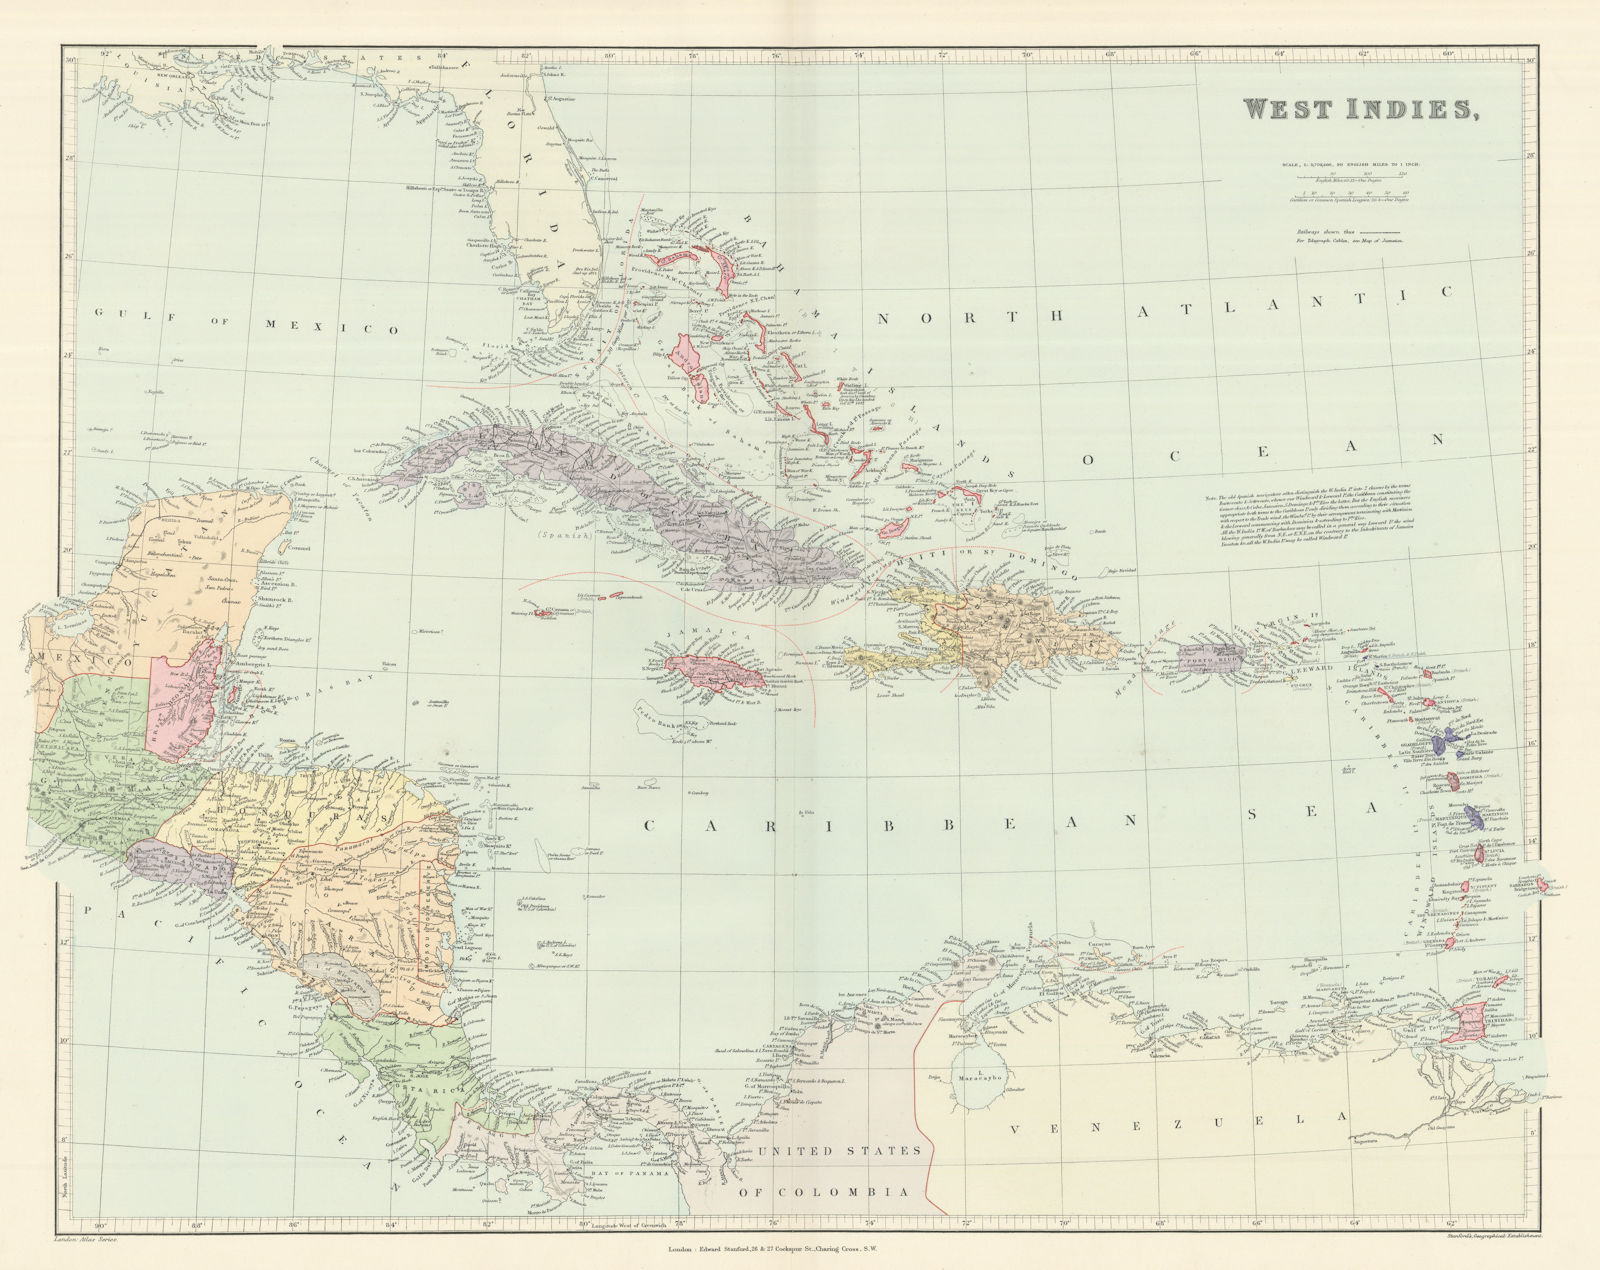 West Indies Islands & Central America. Caribbean. STANFORD 1894 old map